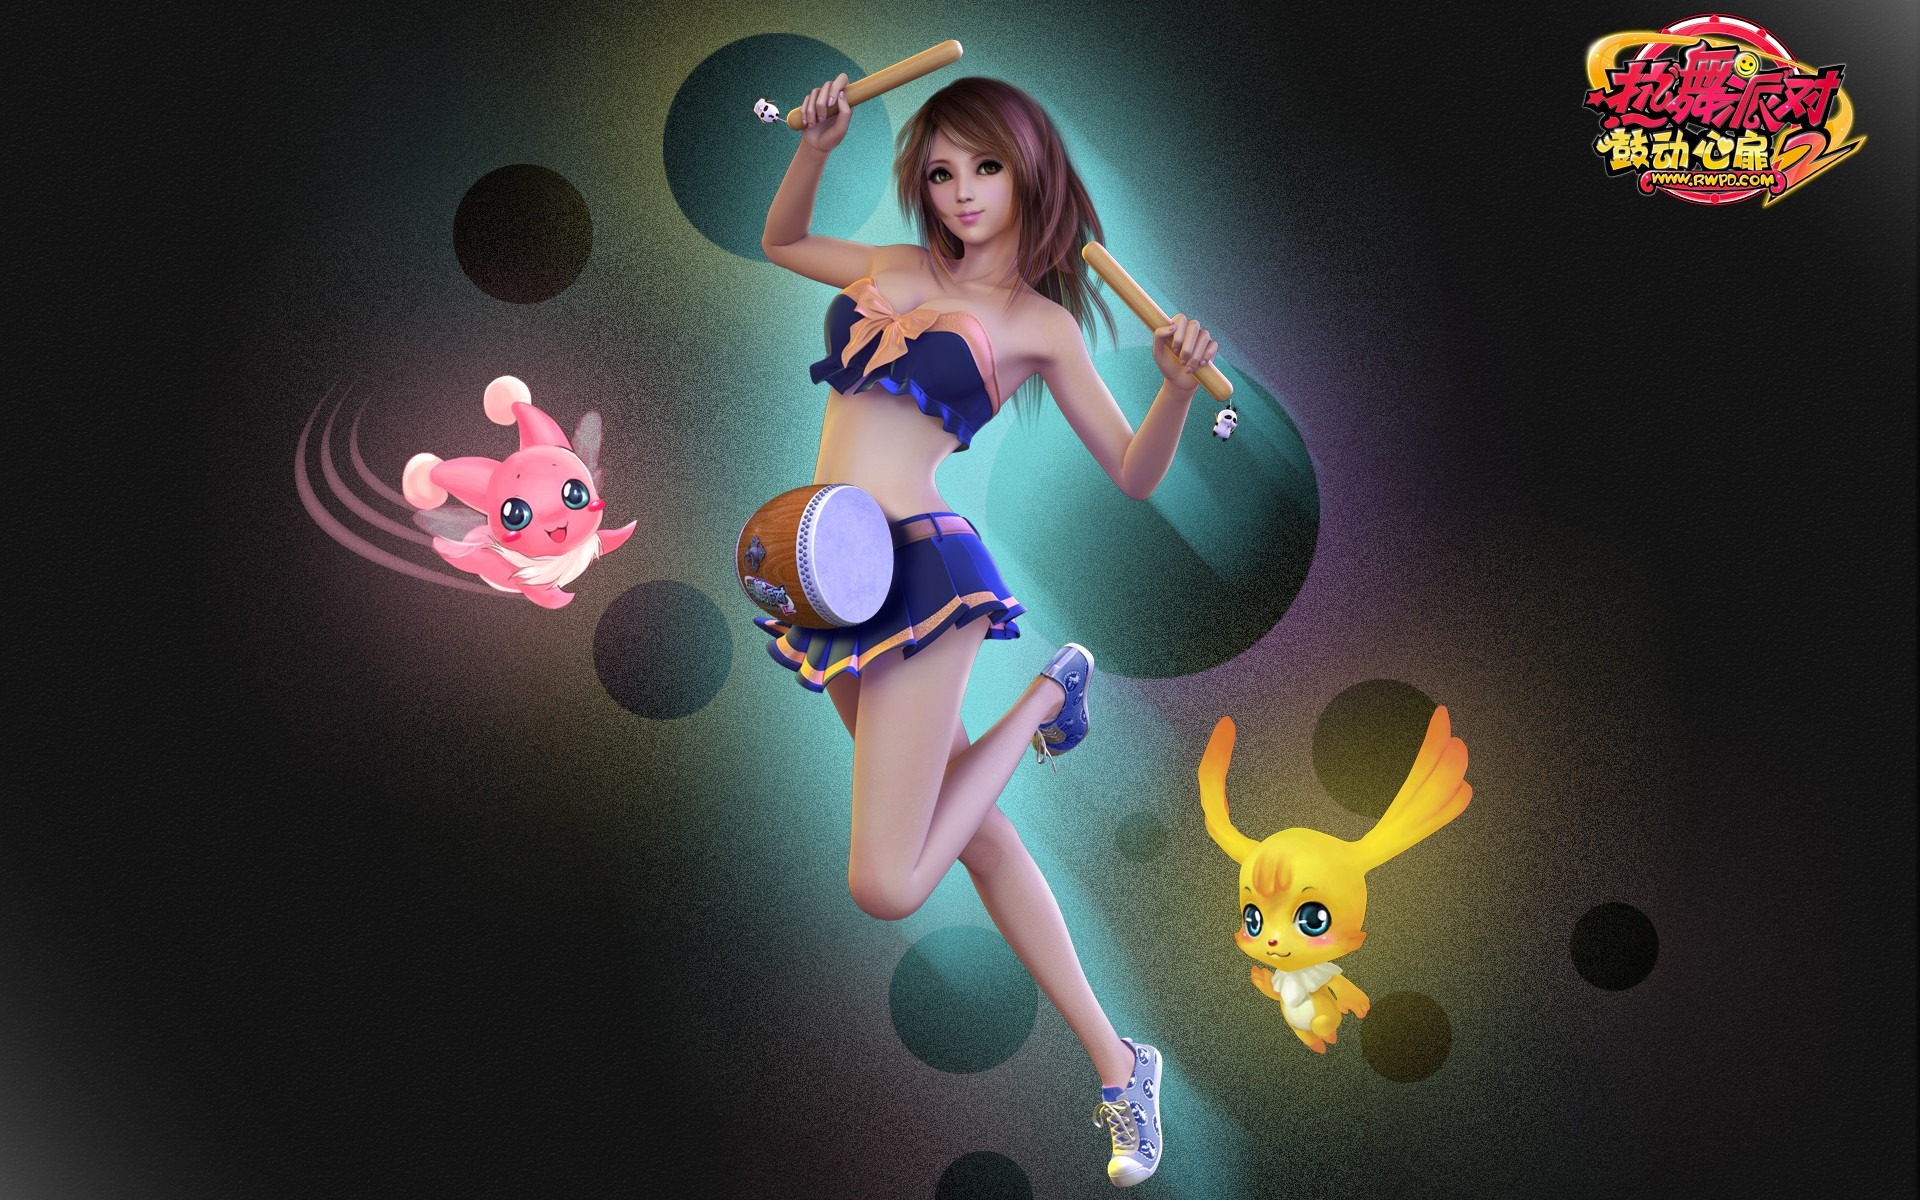 Online game Hot Dance Party II official wallpapers #16 - 1920x1200